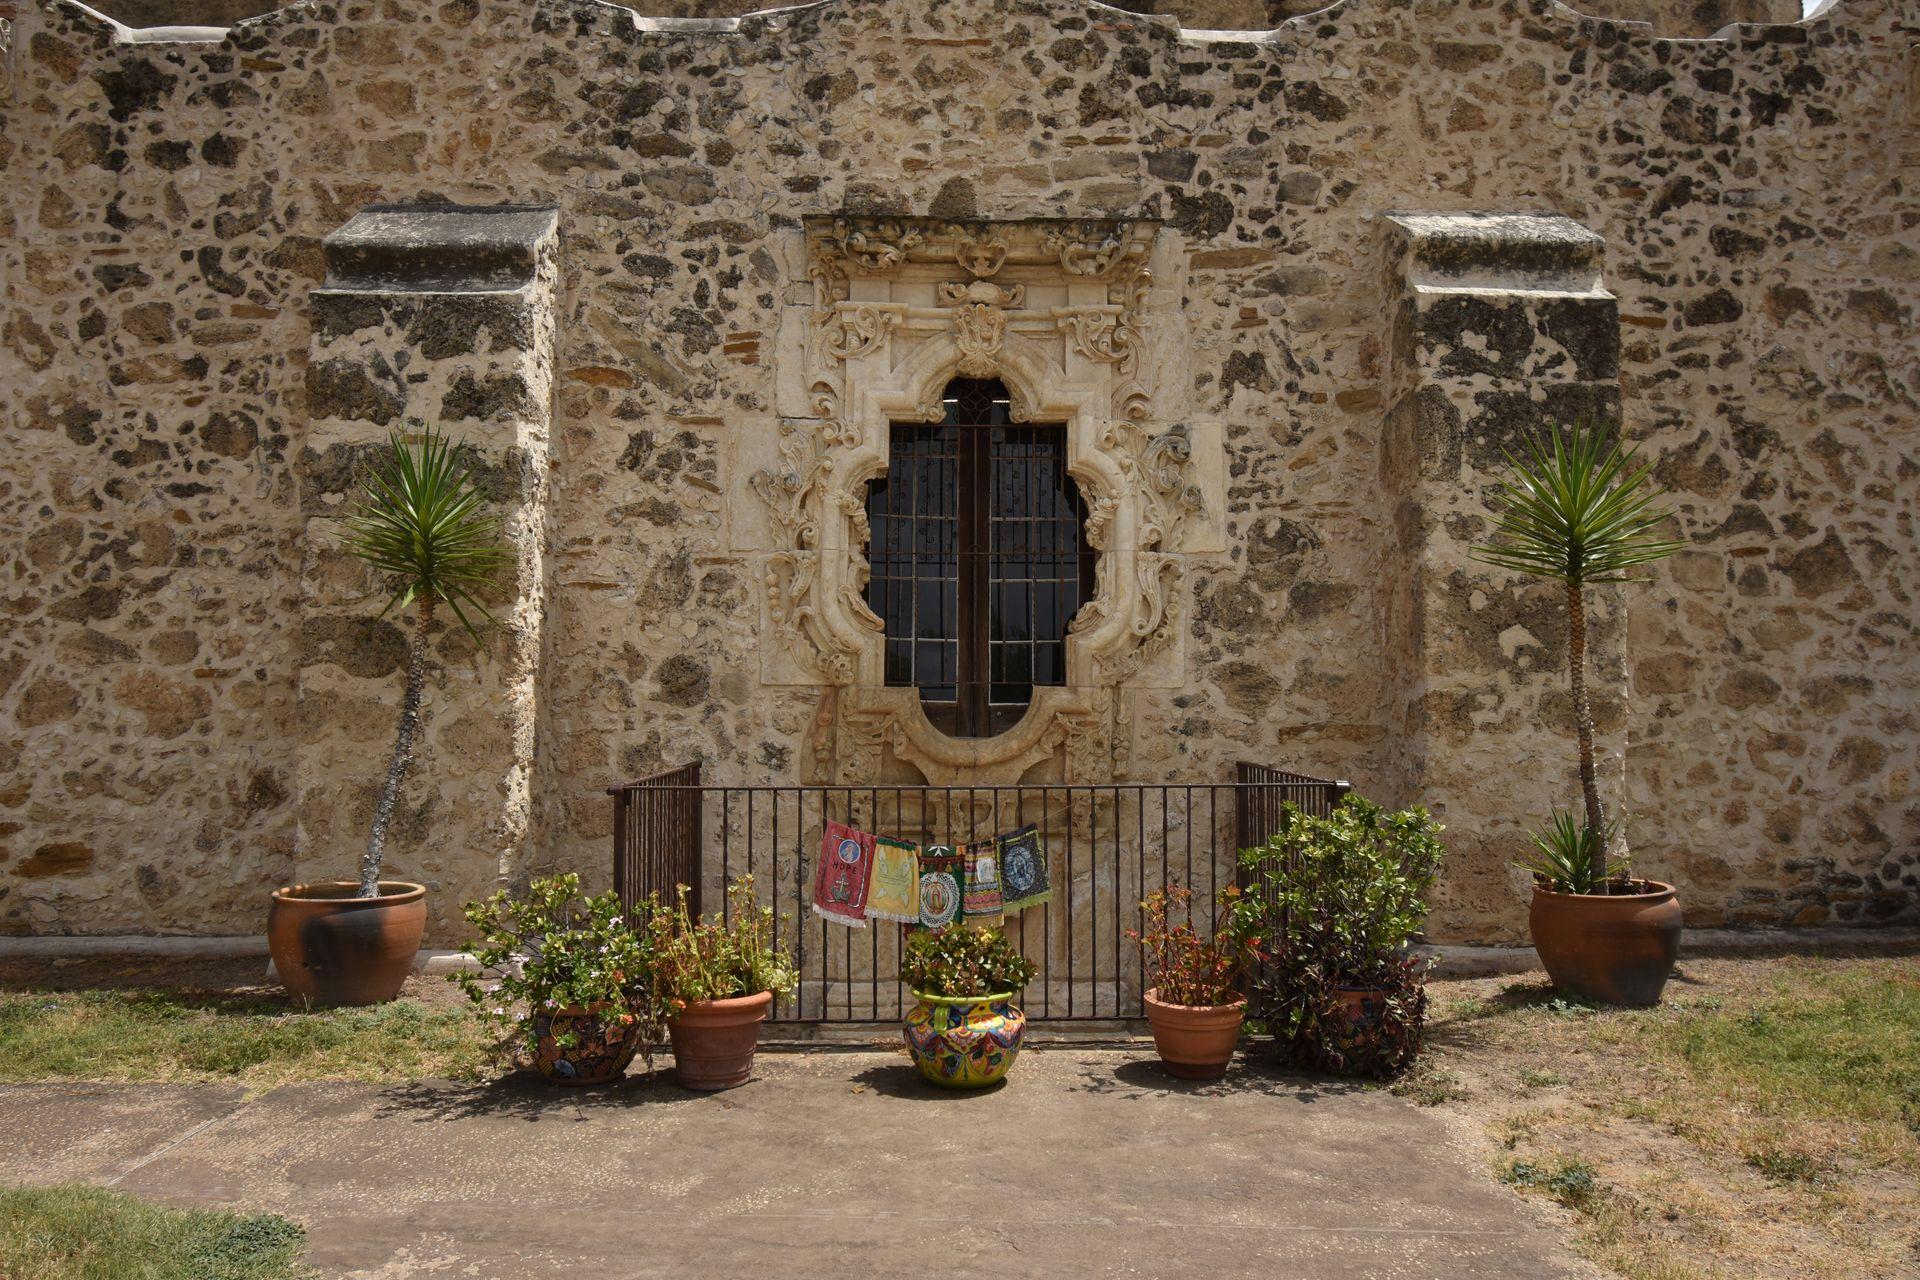 A window at Mission San Jose with some plants sitting outside.